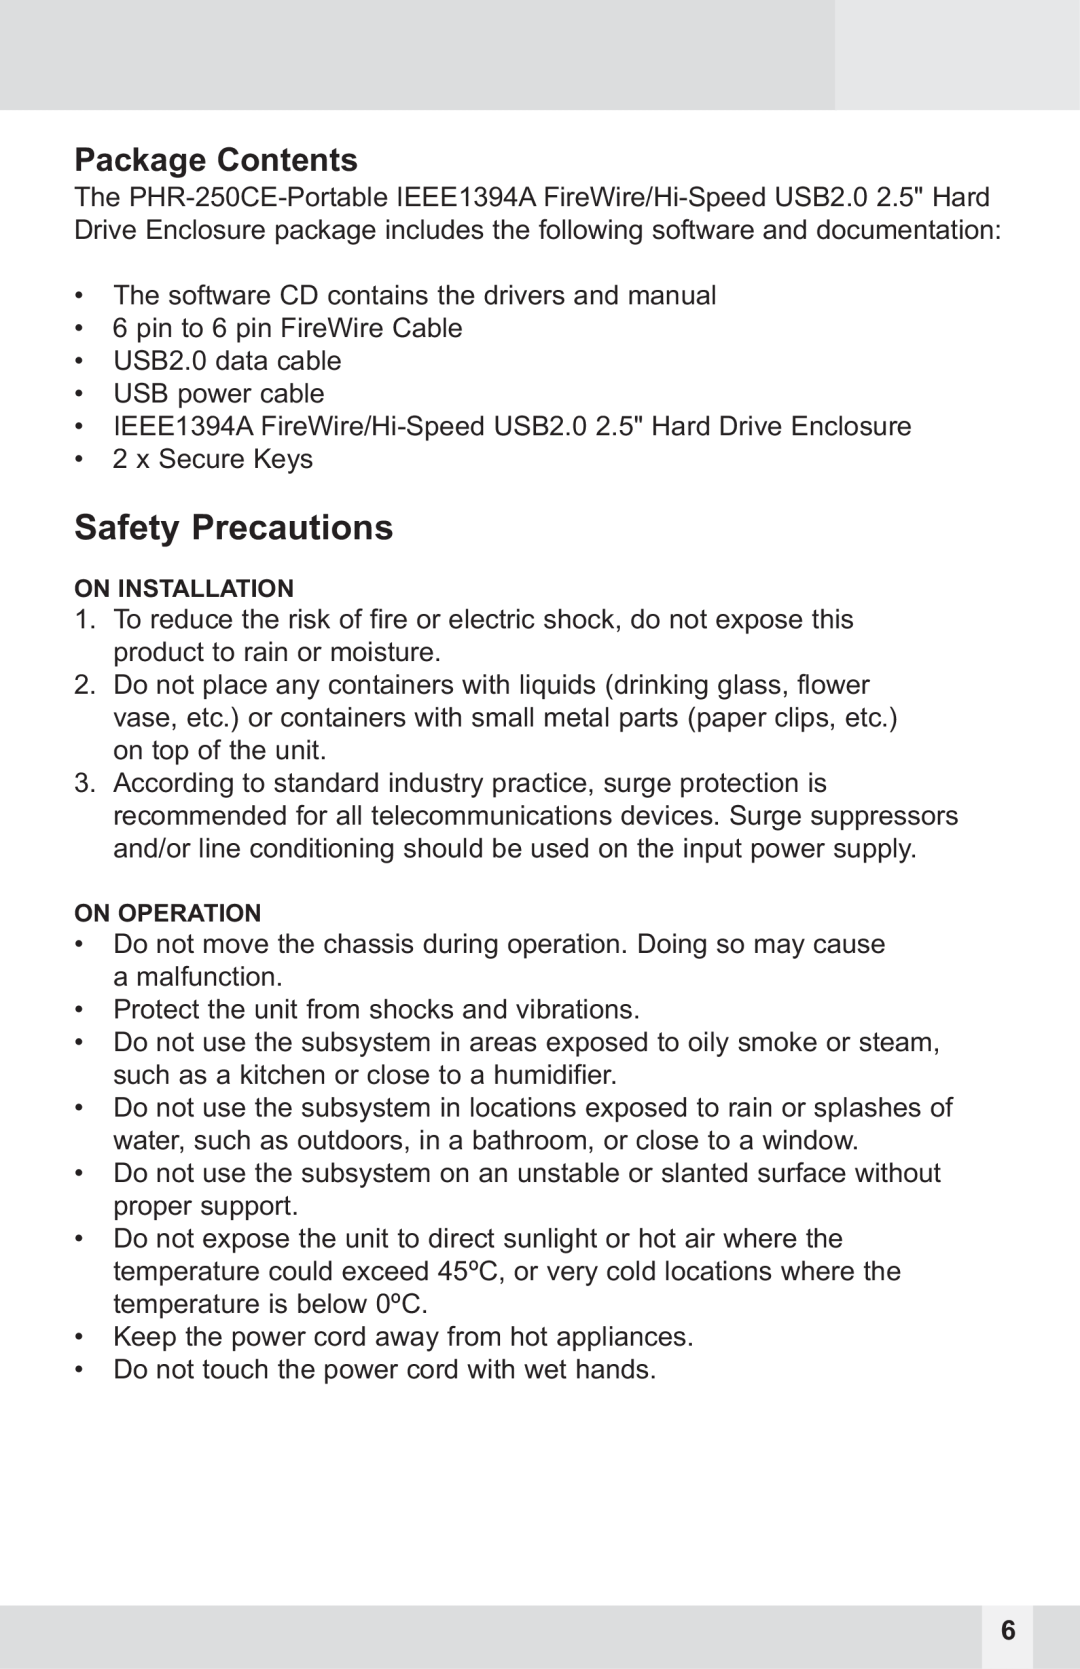 Macally PHR-250CE user manual Safety Precautions 